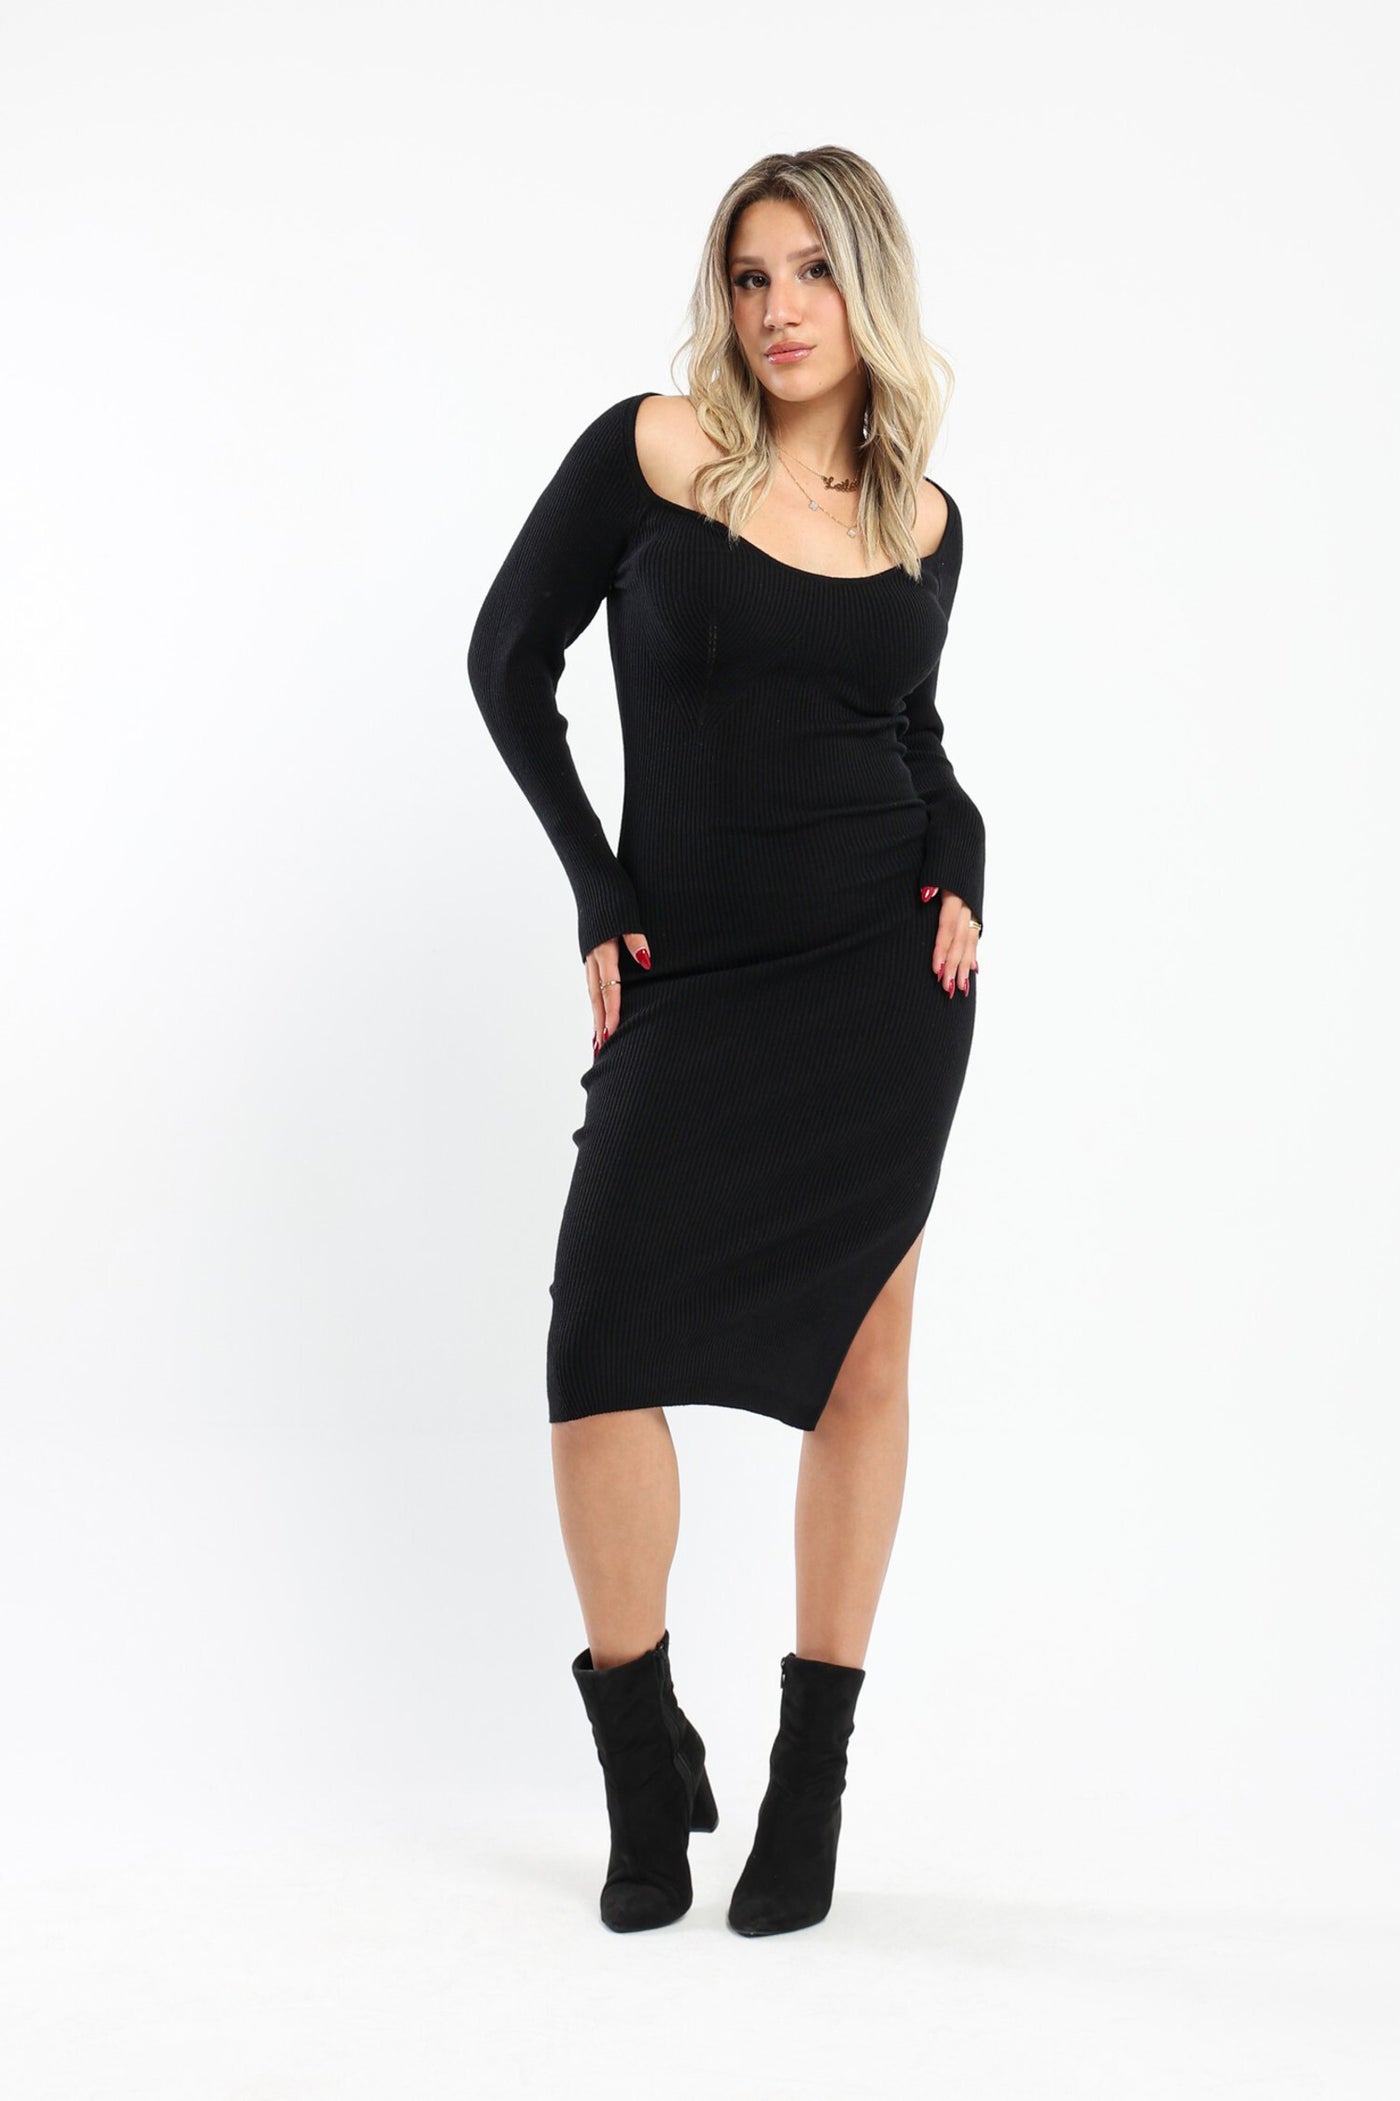 Dress - Bodycon - Cut-out Side